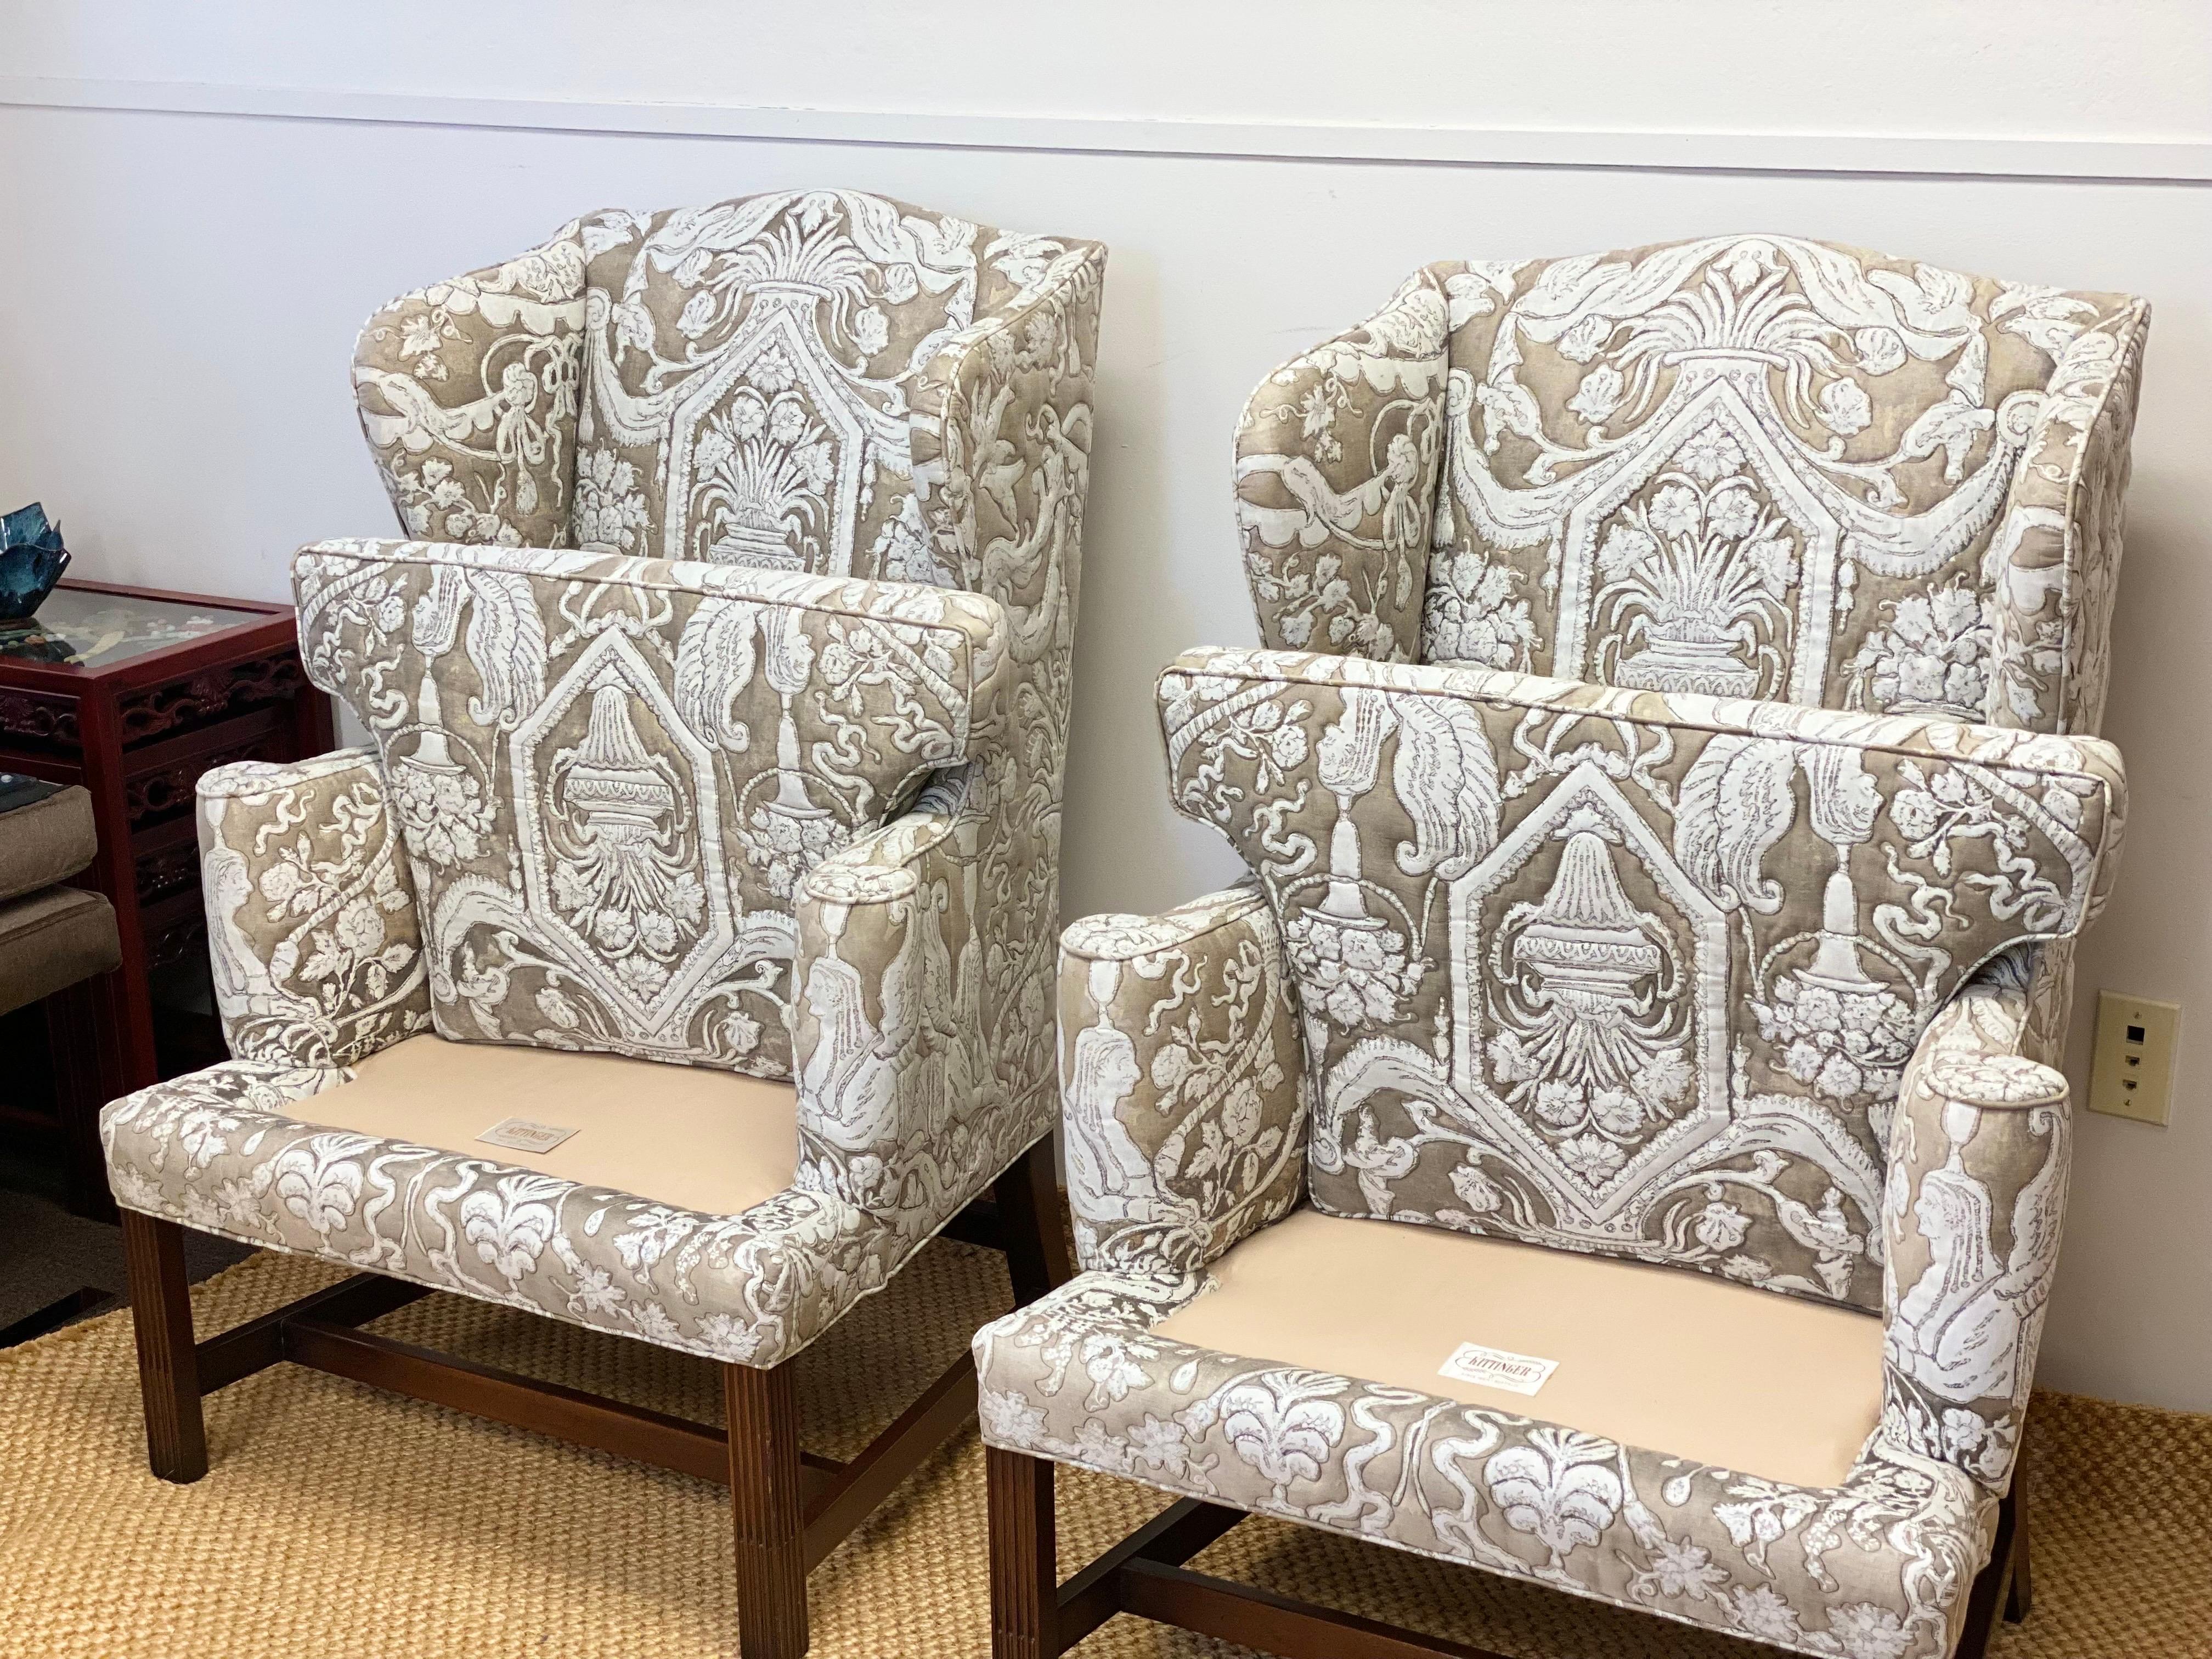 Mid-20th Century 1960s Kittinger Cw12 Colonial Williamsburg Neoclassical Wingback Chairs – a Pair For Sale